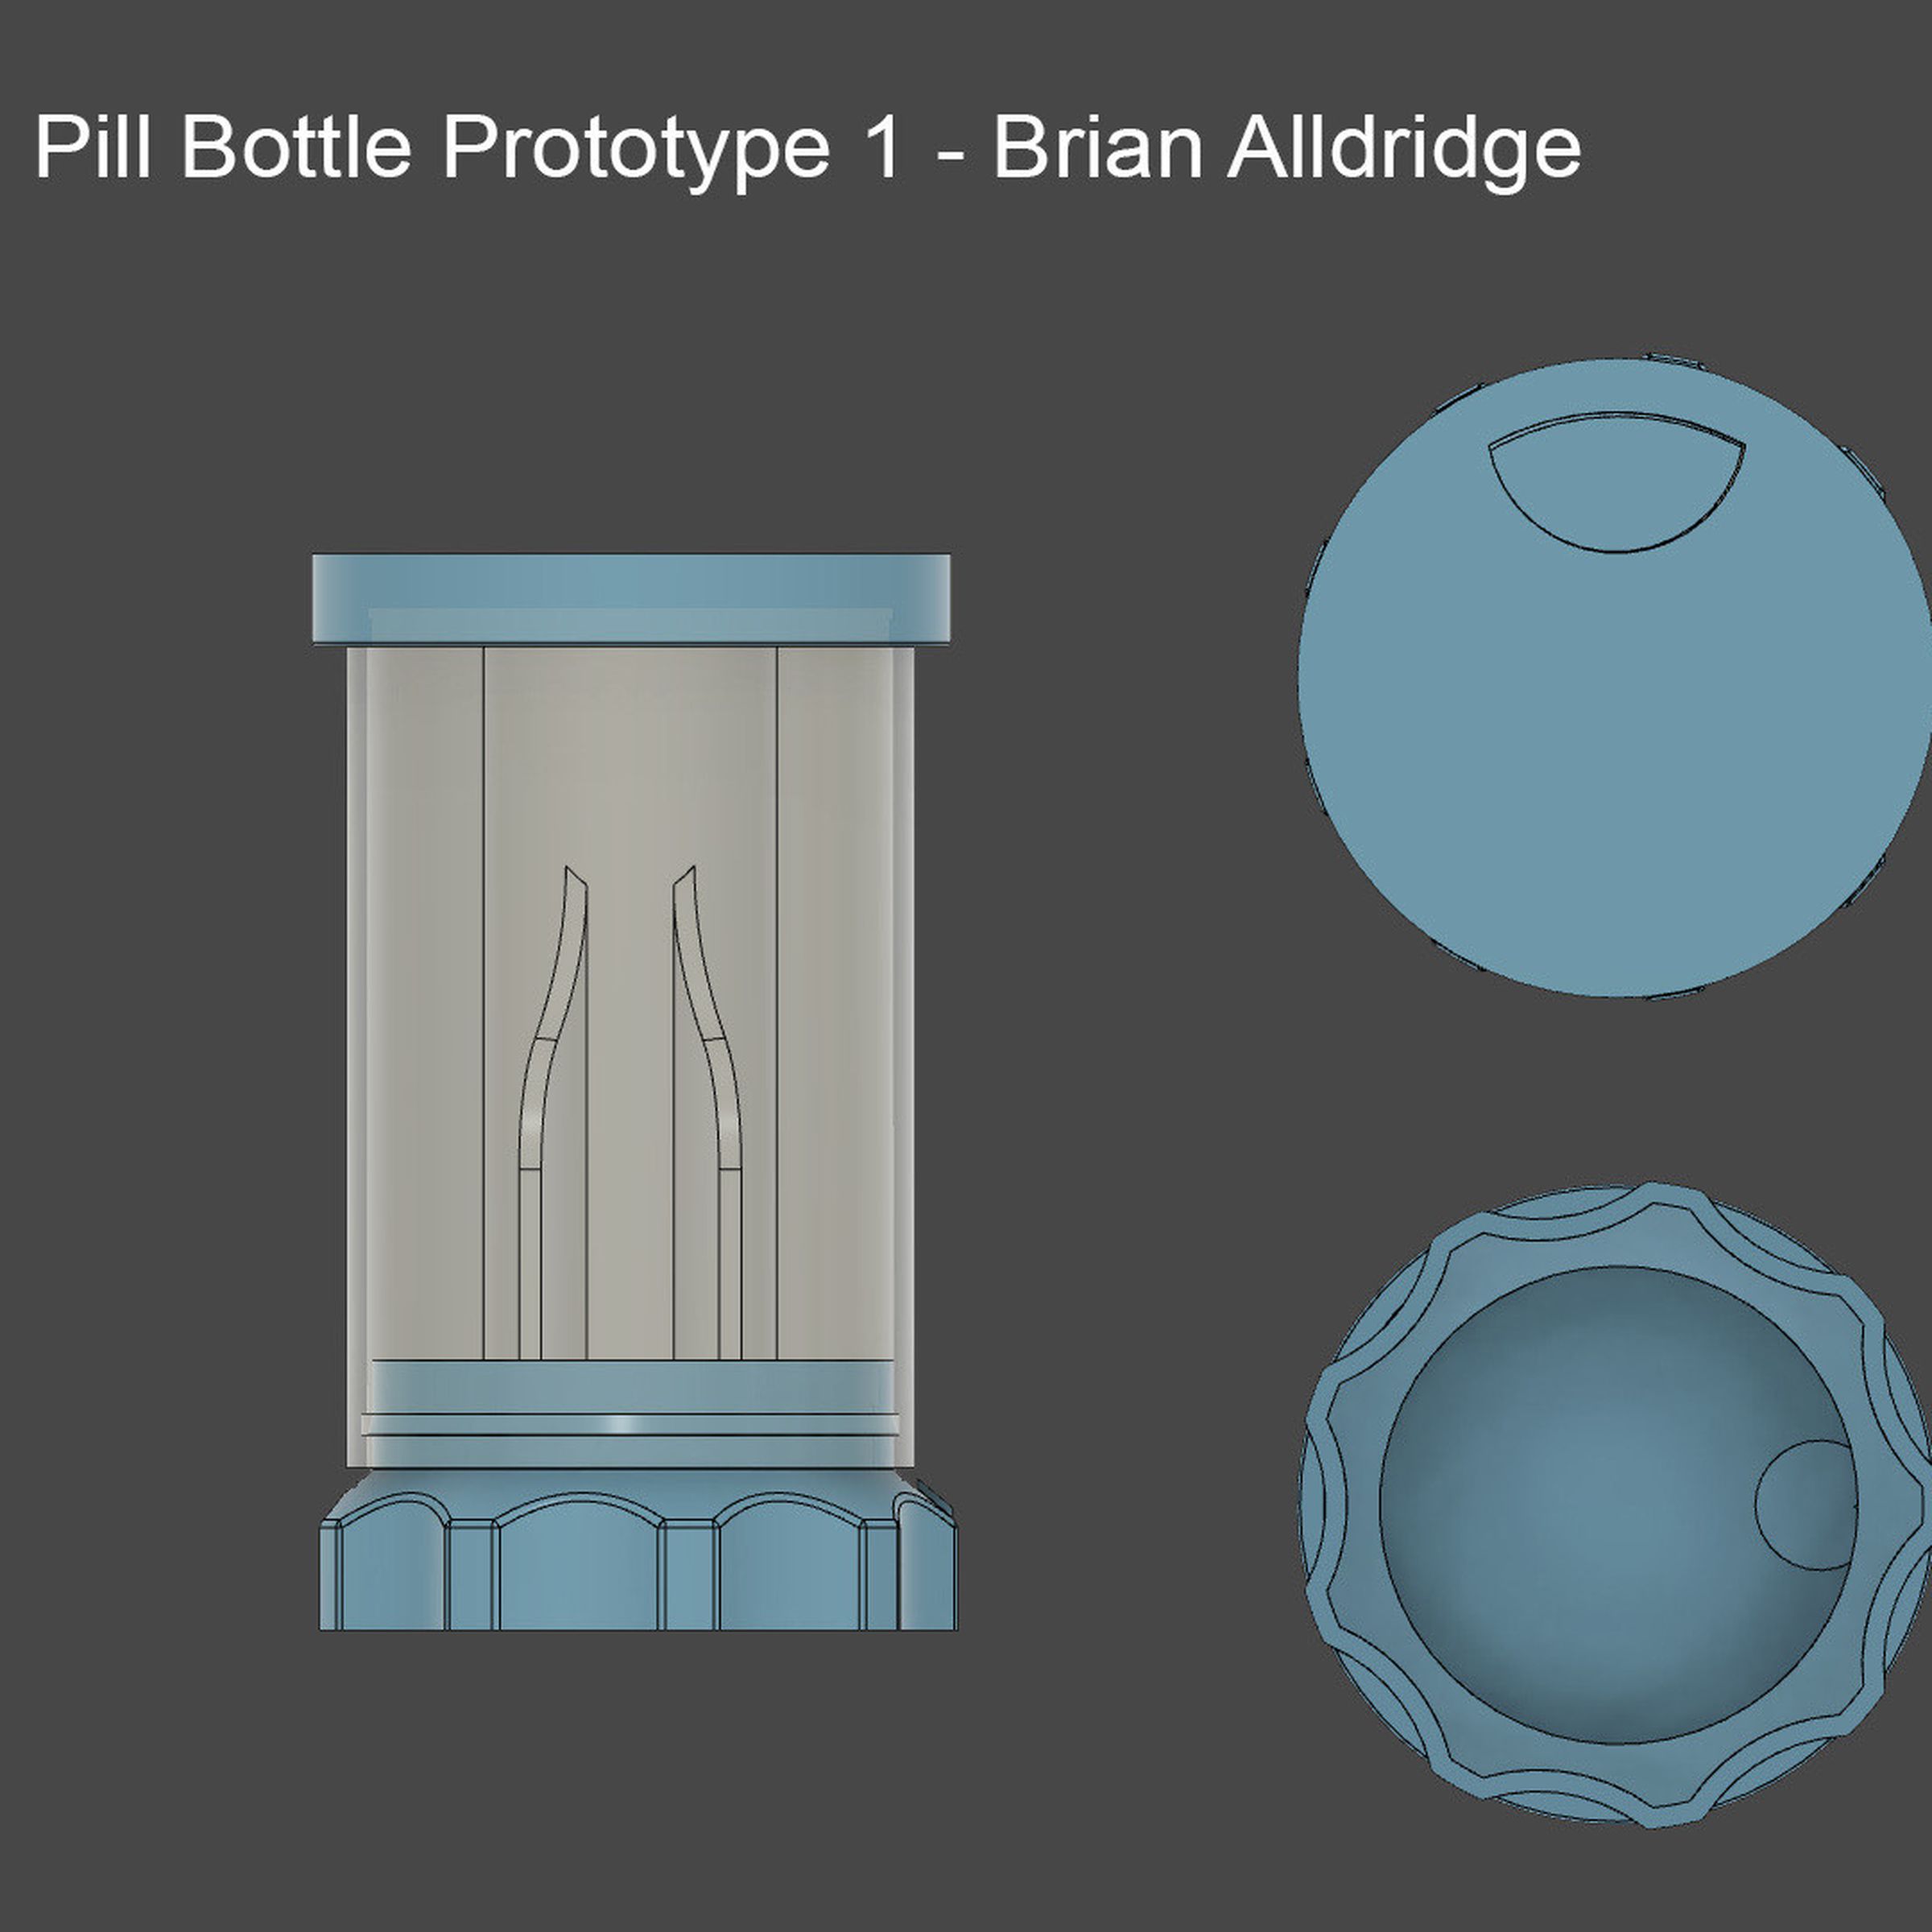 Text at the top left reads “Pill Bottle Prototype 1 - Brian Alldridge”. There is a side, top, and bottom view of a bottle with a transparent body and blue cap and base. Inside the bottle is a chute for a pill to travel through. 